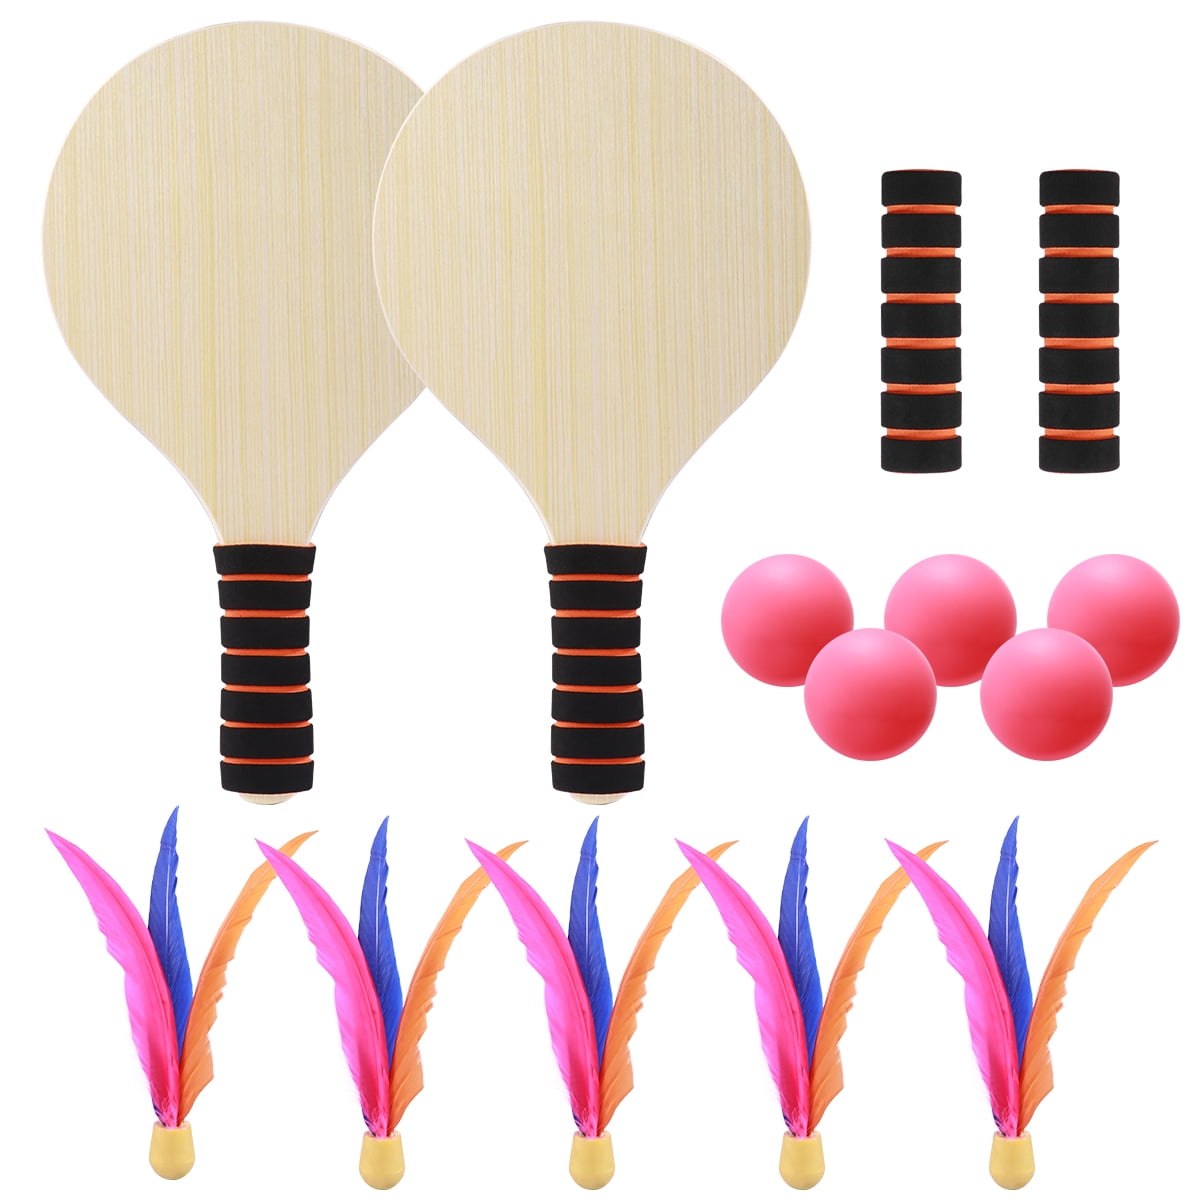 Overmont Game Set Beach Paddle Set Camping Gear with Wooden Racket Beachball Badminton Racquet Cricket Ball shuttlecock game and Family Training Kids Childrens Office Outdoor Sports 